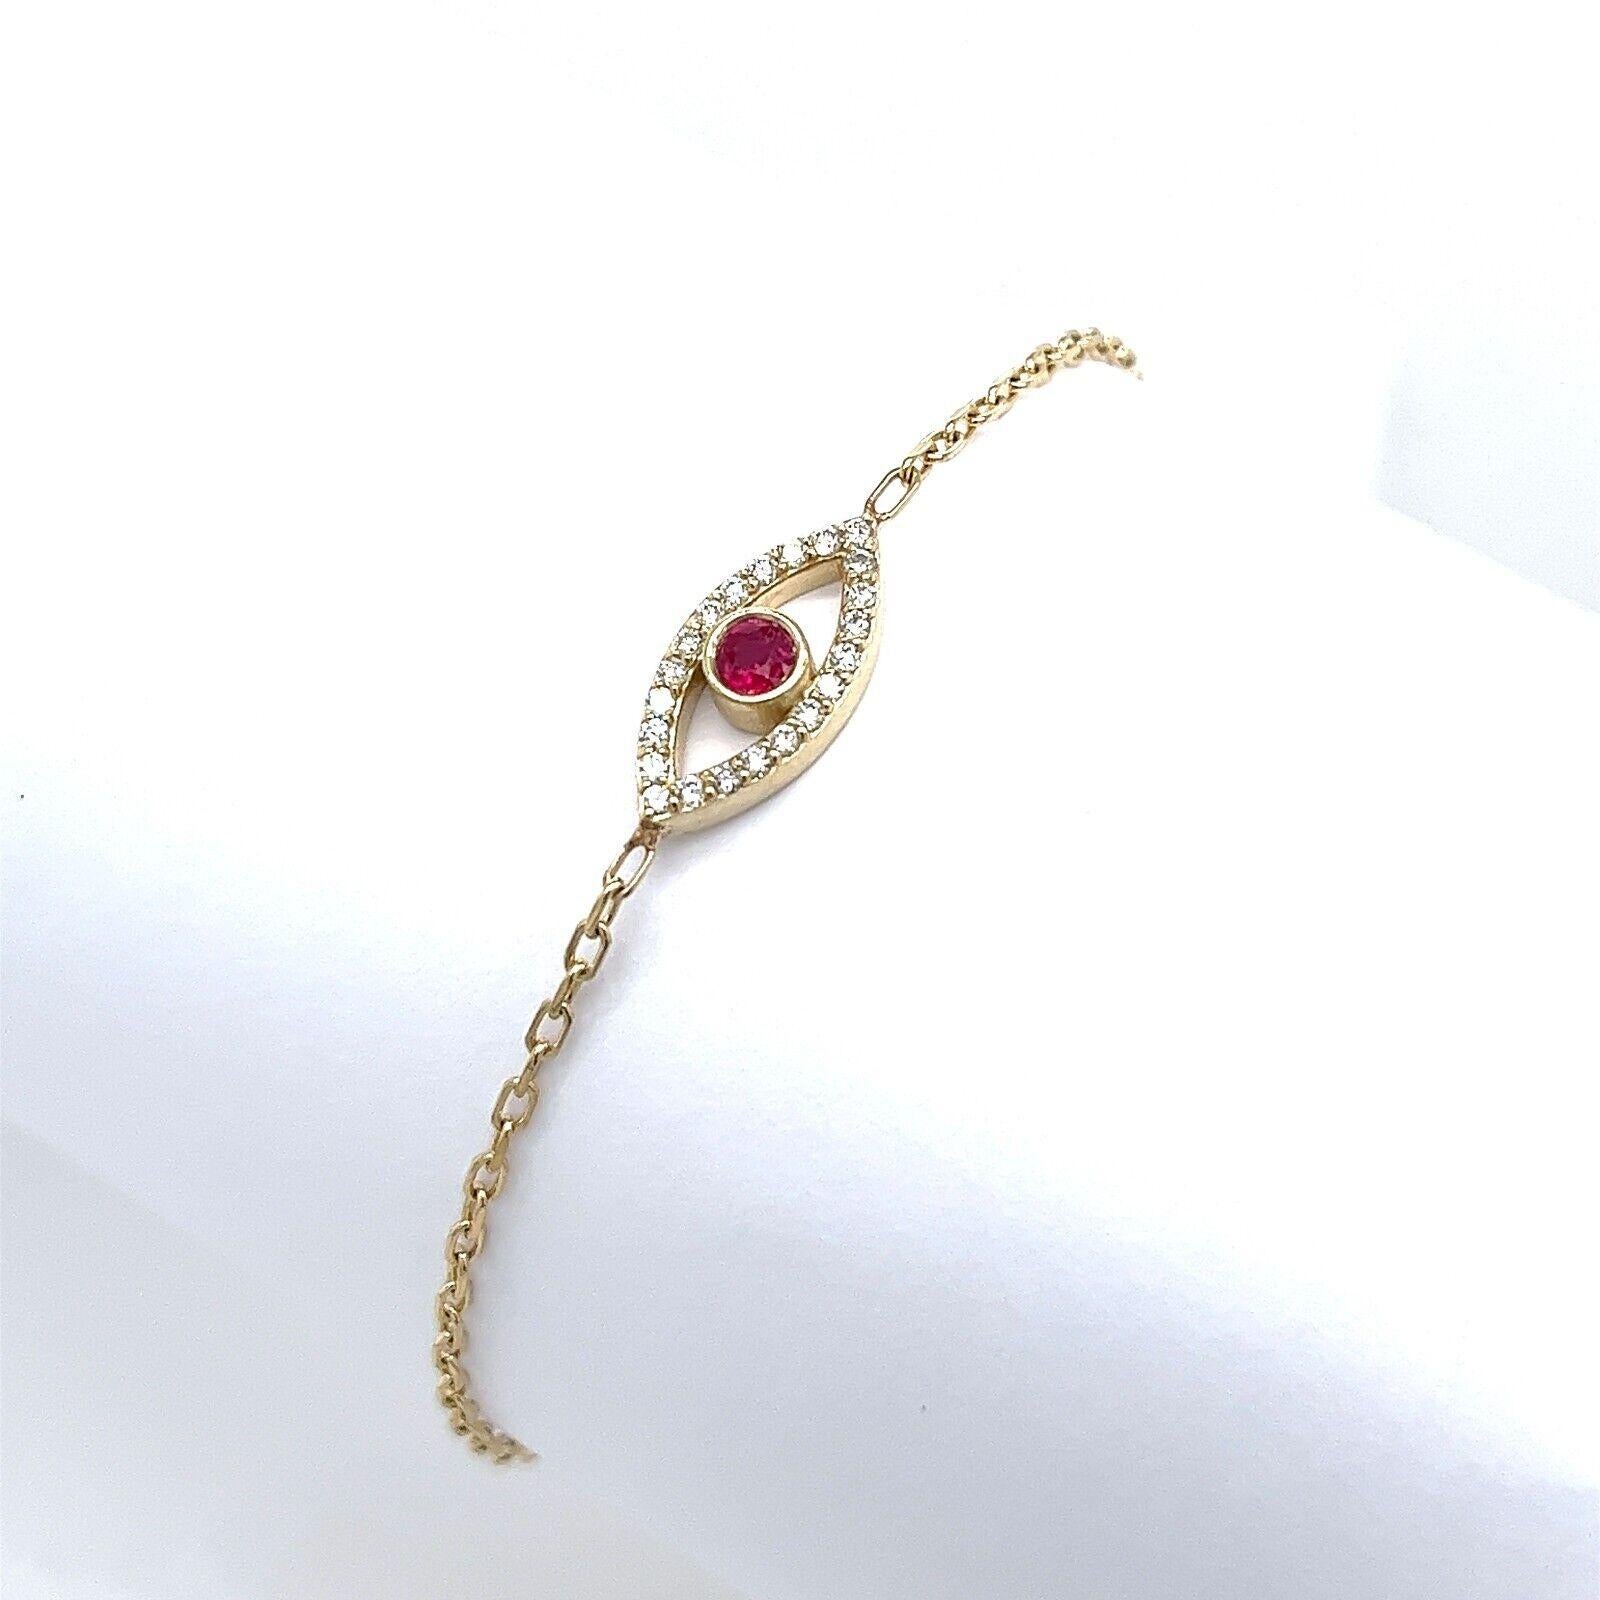 Made by Jewellery Cave- our exquisite diamond & Rubyset evil eye bracelet—an enchanting fusion of style and symbolism. Crafted in 9ct yellow gold, this fashion-forward accessory embodies eleganceand spirituality. The centerpiece of this mesmerizing